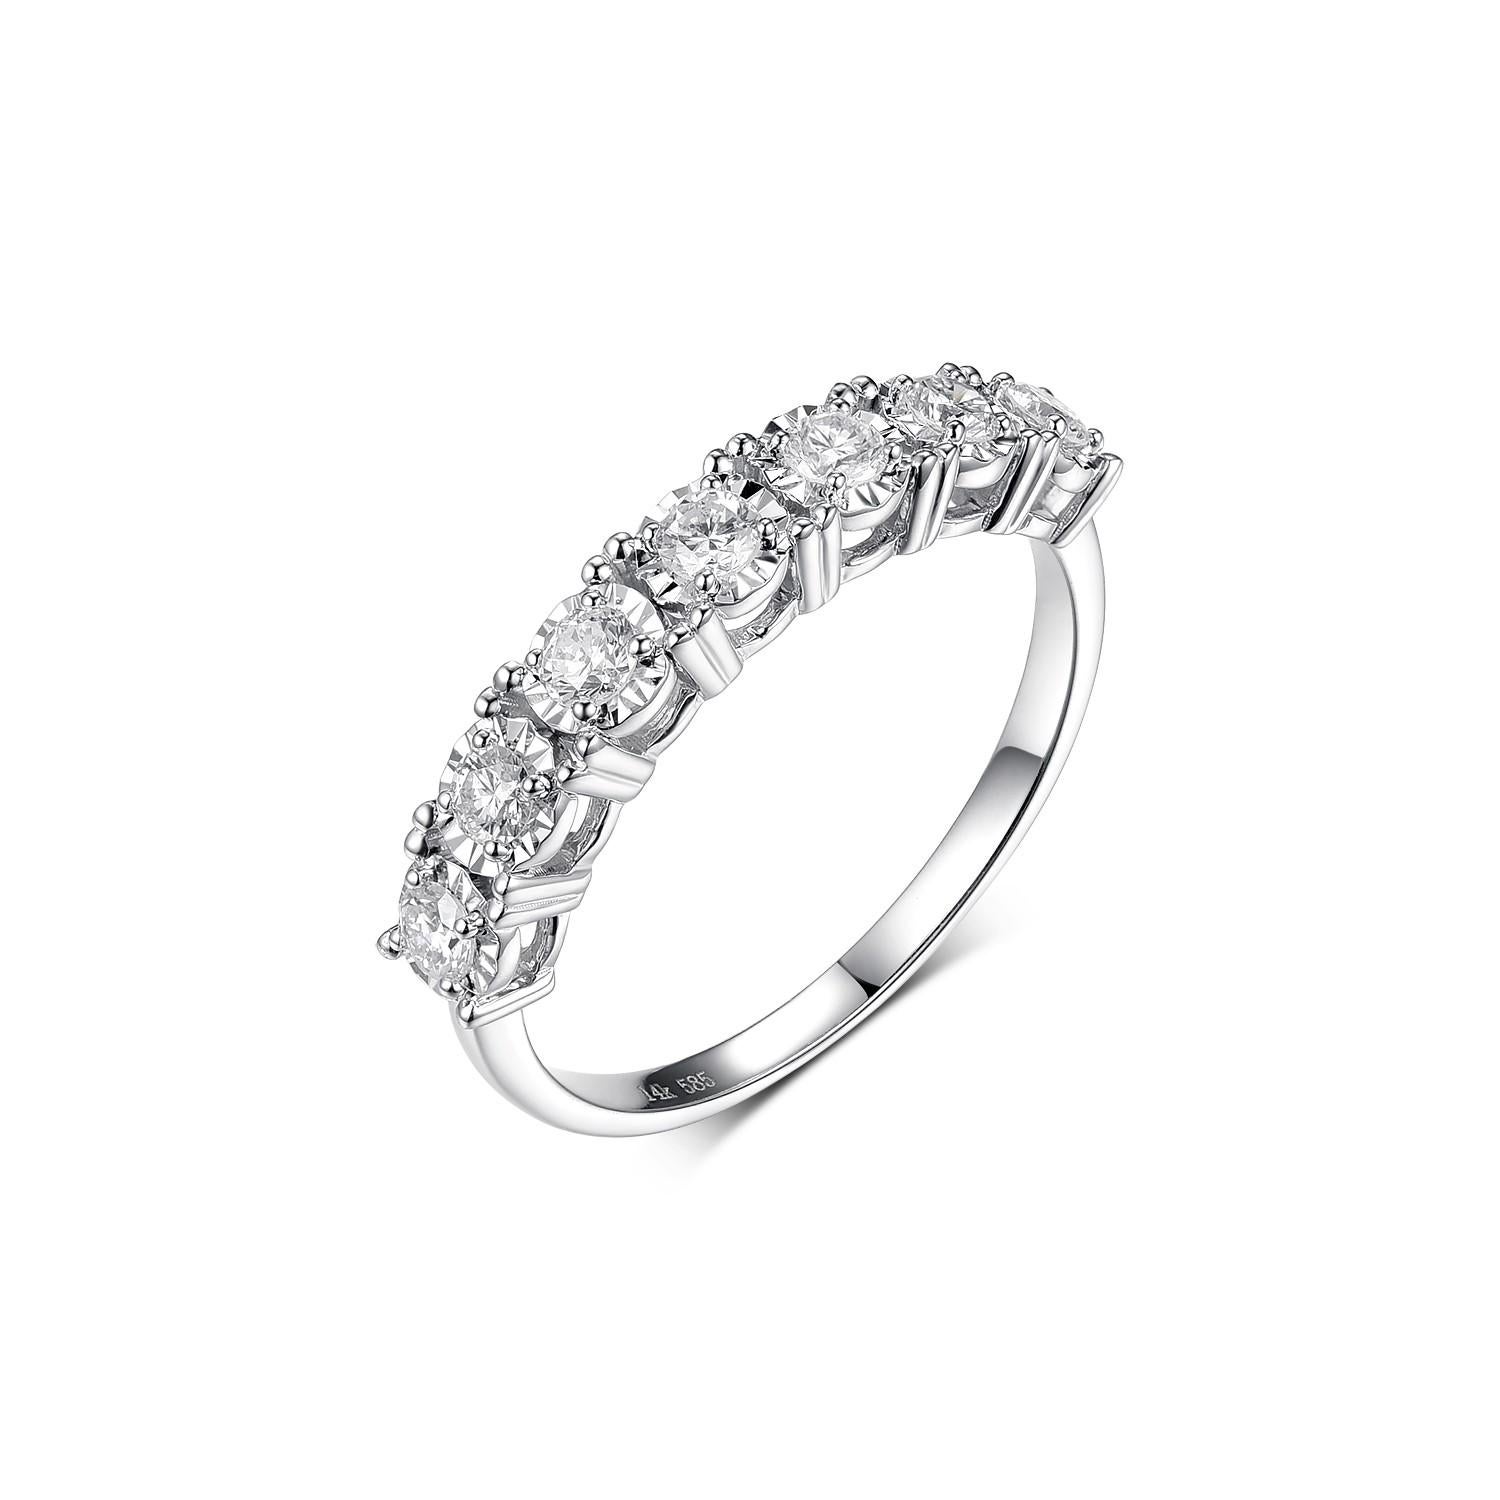 This ring features diamond weight 0.38 carat.  Ring is set in 14 karat white gold. Great for everyday use and it is stack-able with other ring.

Resizing is available
US 6.25
Diamond 0.38 Carat

